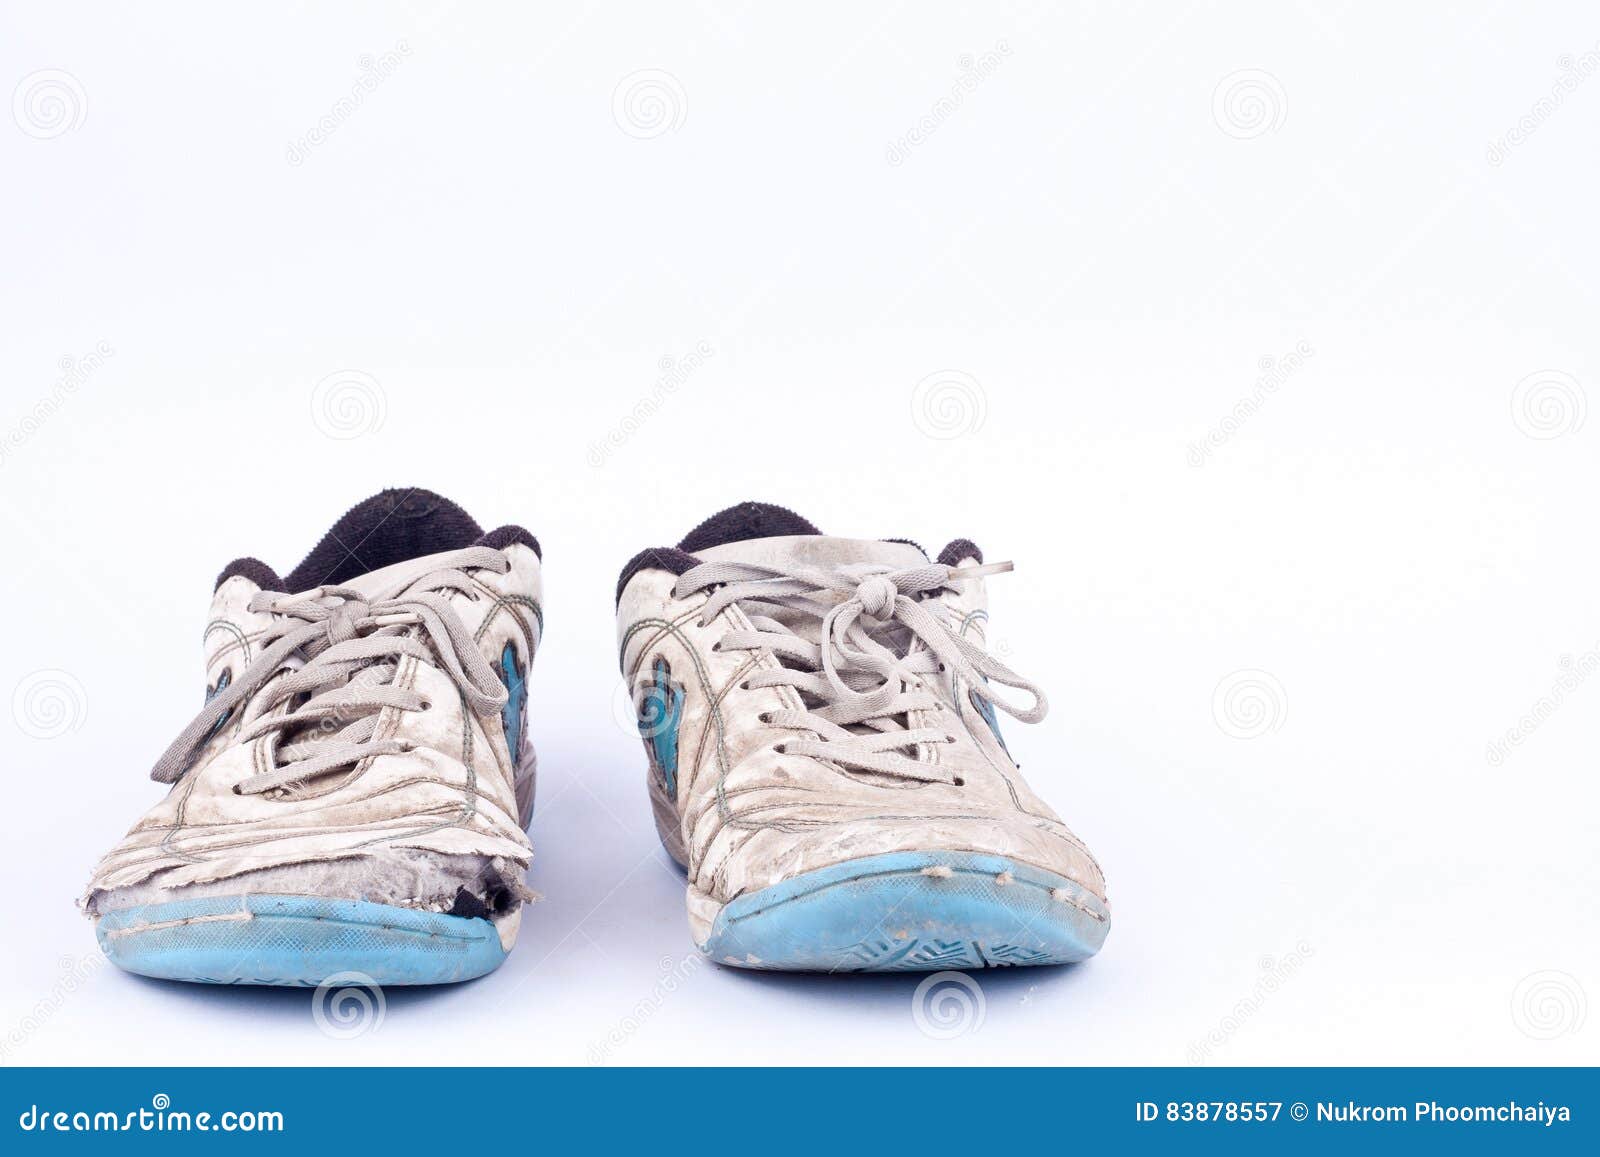 Old Worn Out Futsal Sports Shoes on White Background Stock Image ...